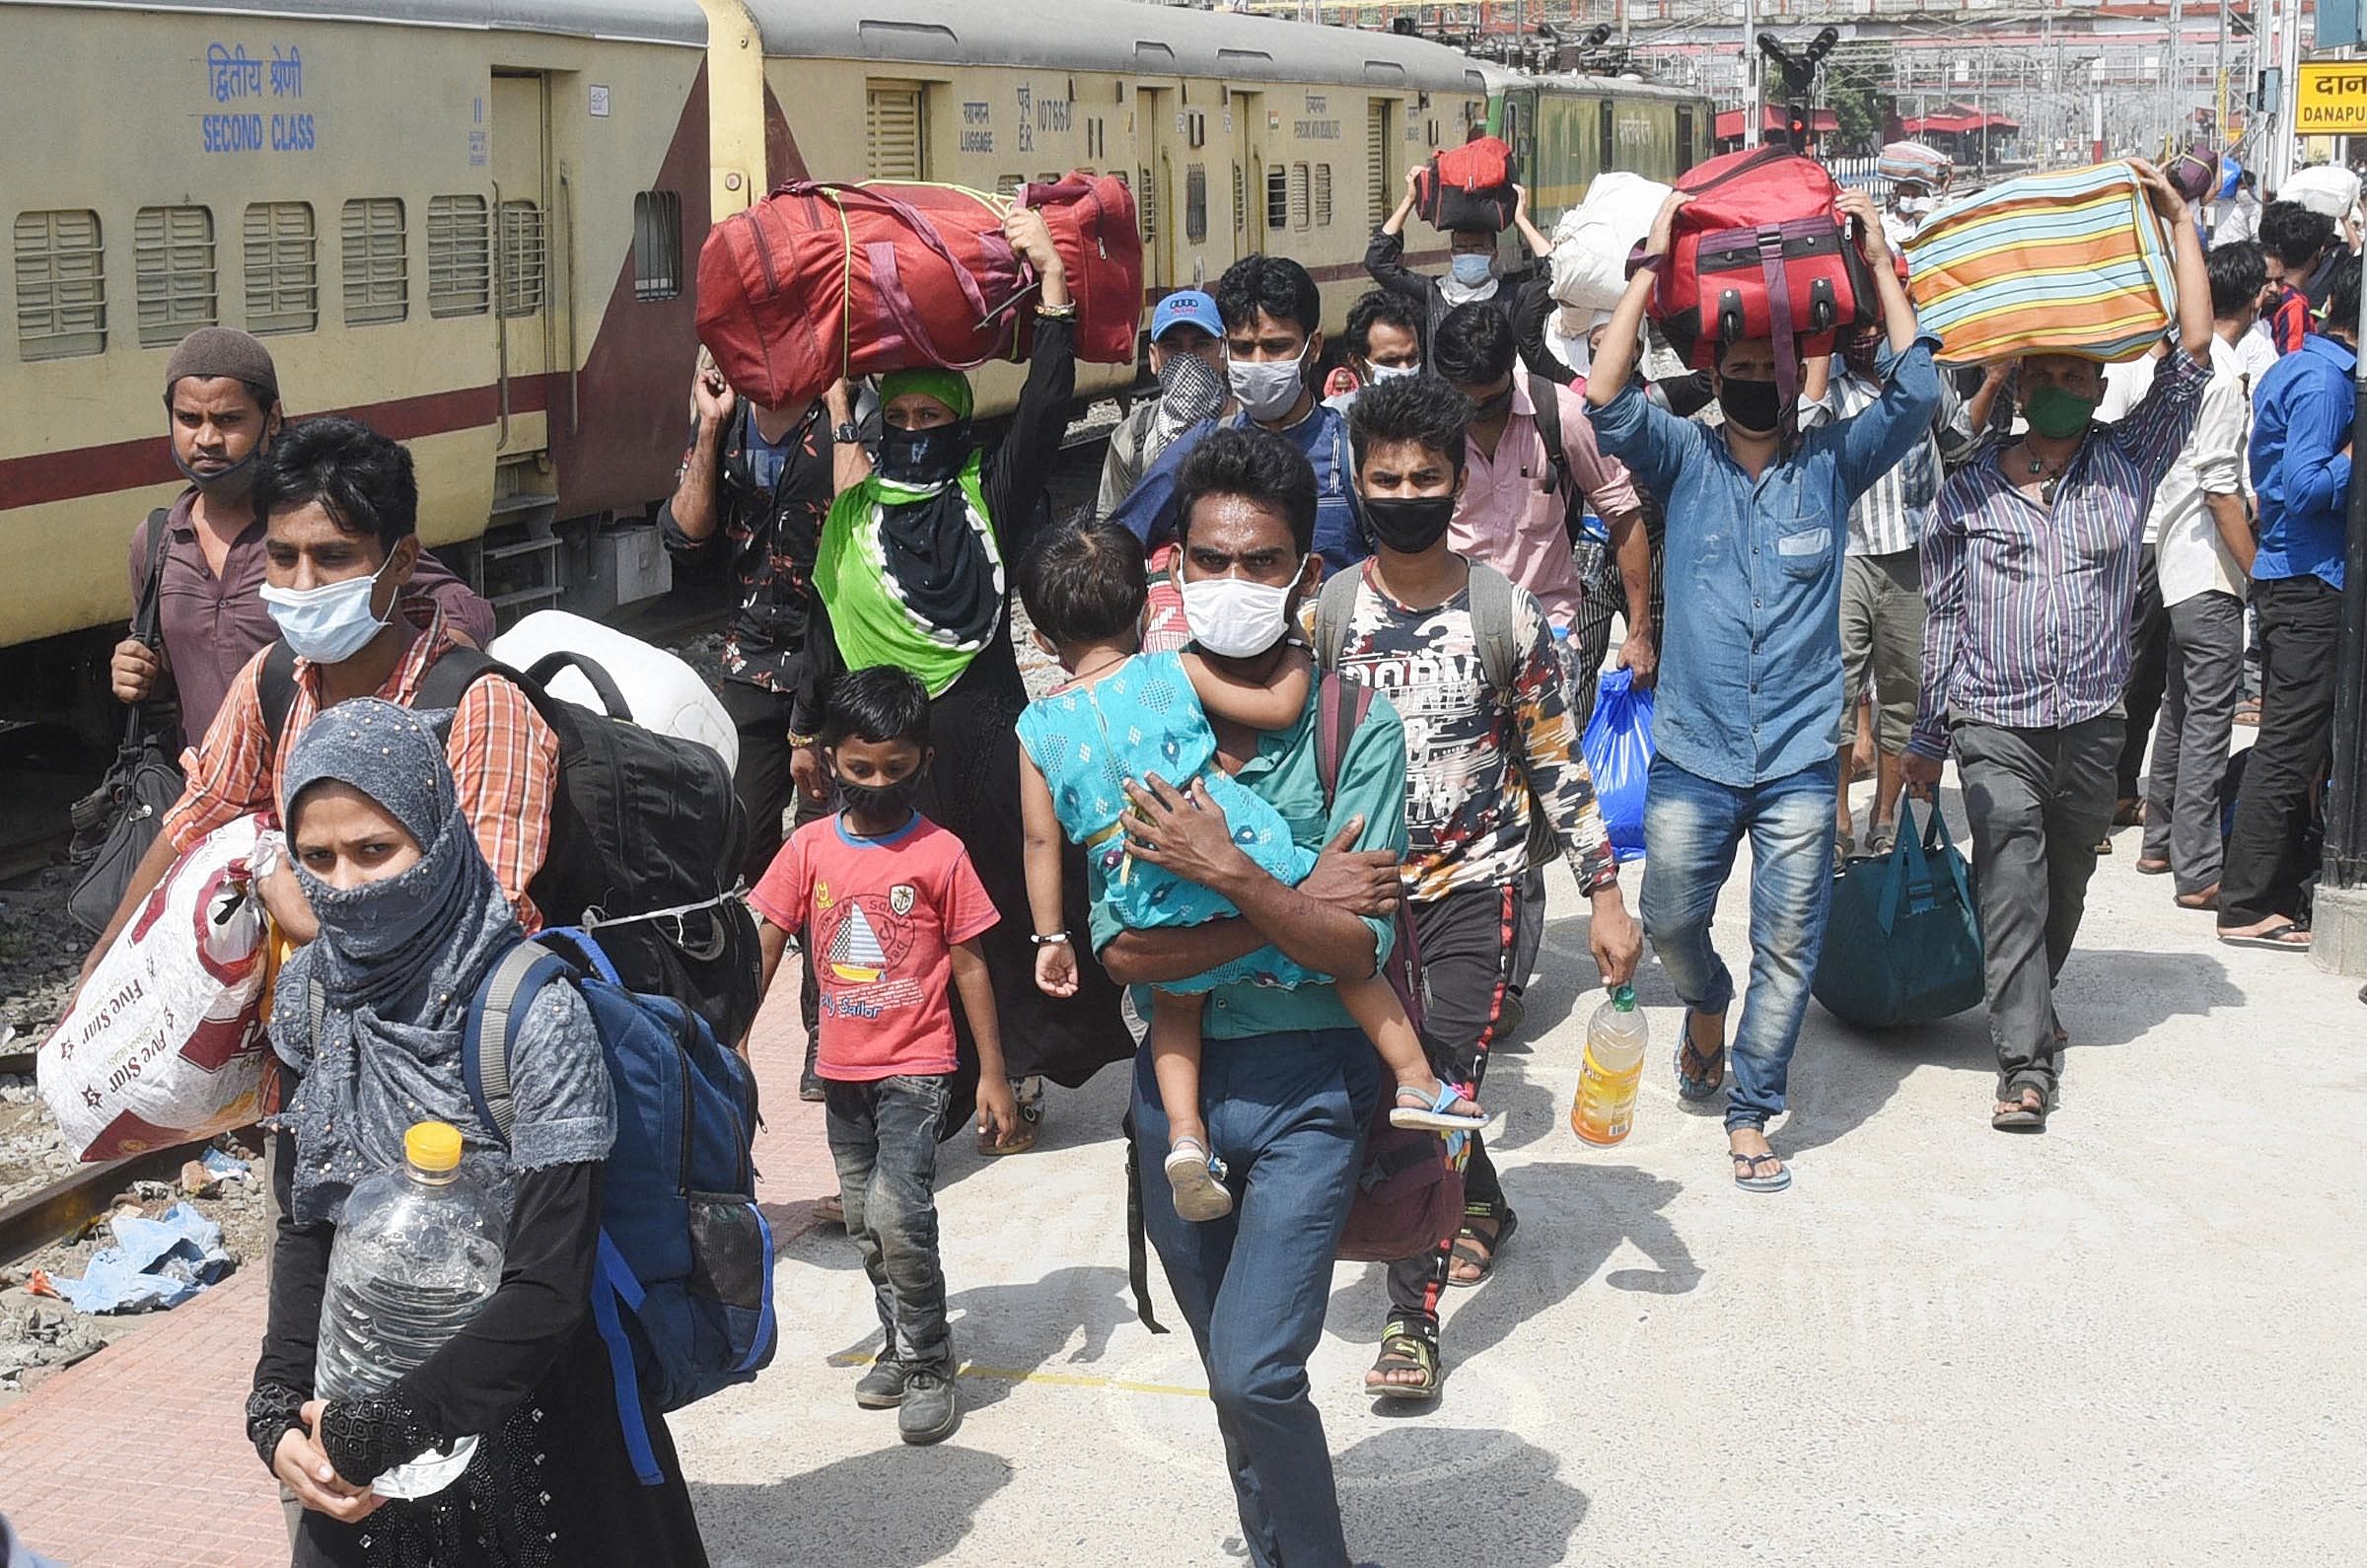 Migrants from Mumbai arrive at Danapur railway station to board a local passenger train to reach their destination, during the ongoing COVID-19 nationwide lockdown, in Maharashtra. (PTI Photo)